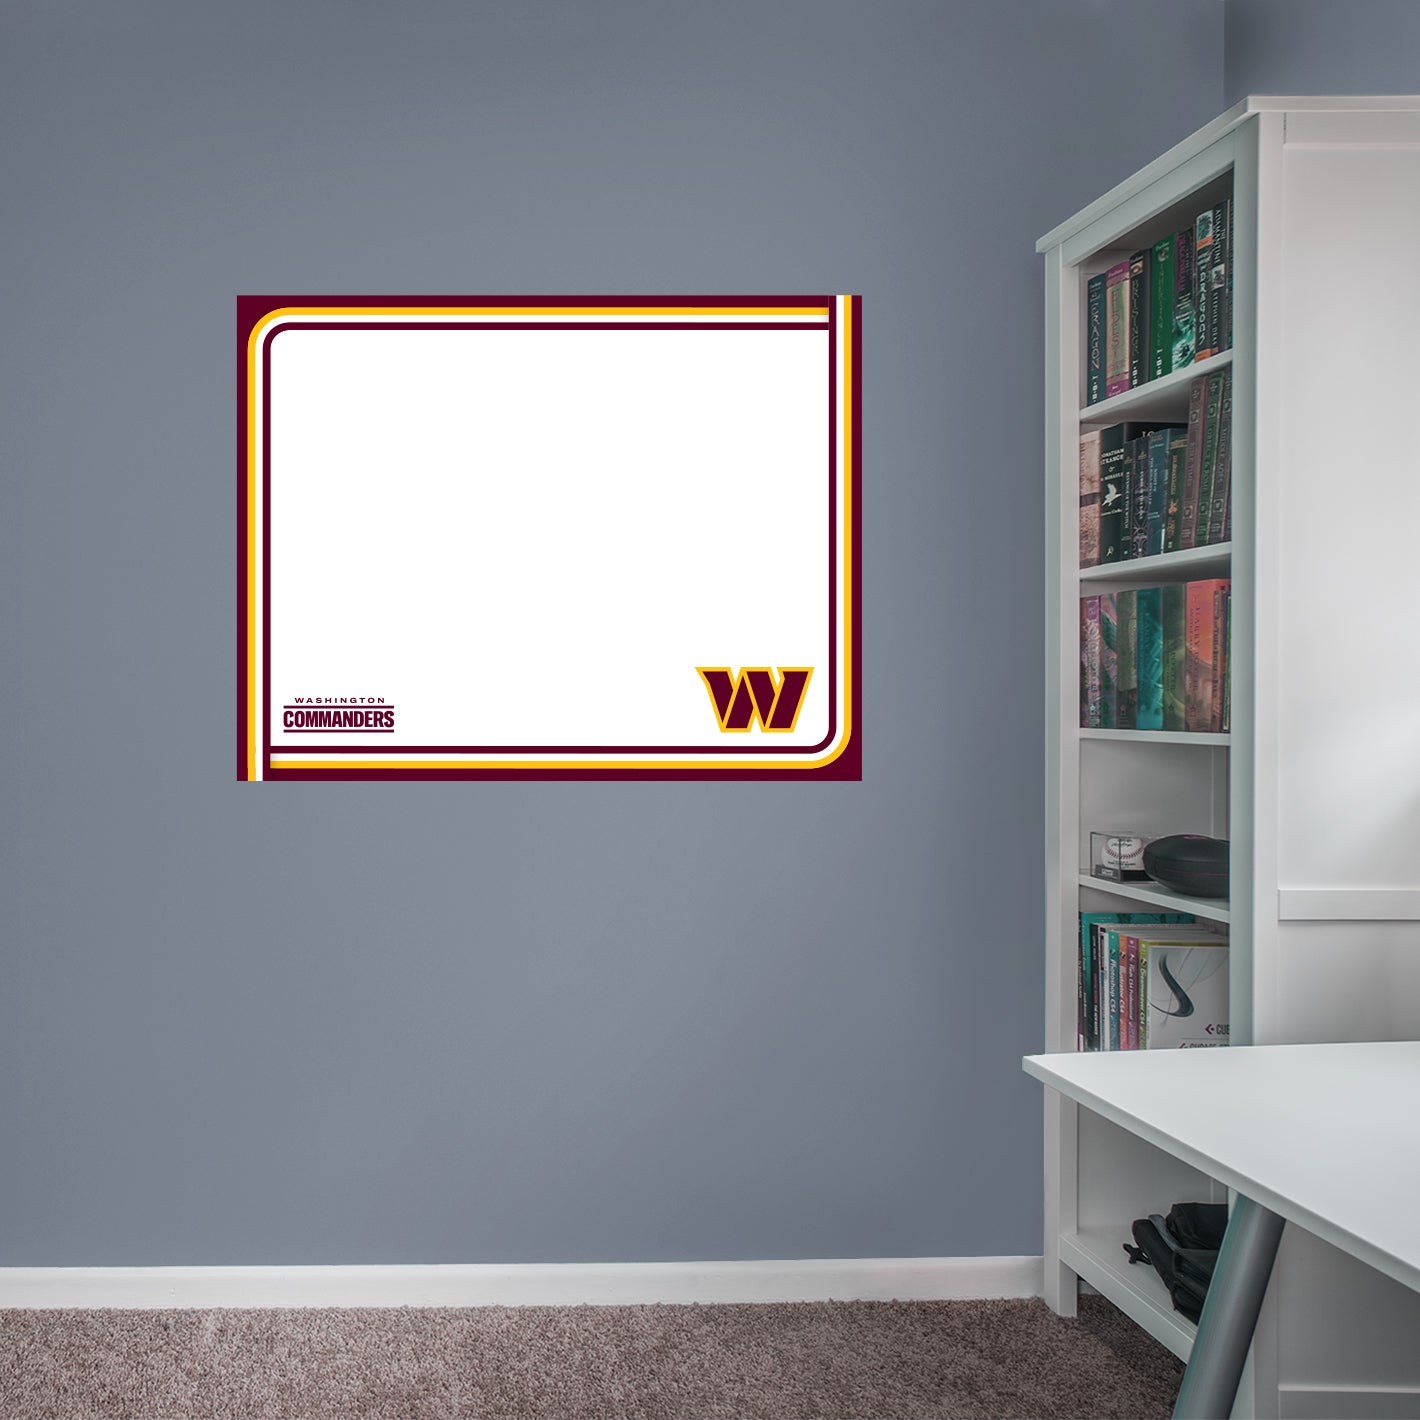 Washington Commanders: Dry Erase Whiteboard - Officially Licensed NFL Removable Adhesive Decal